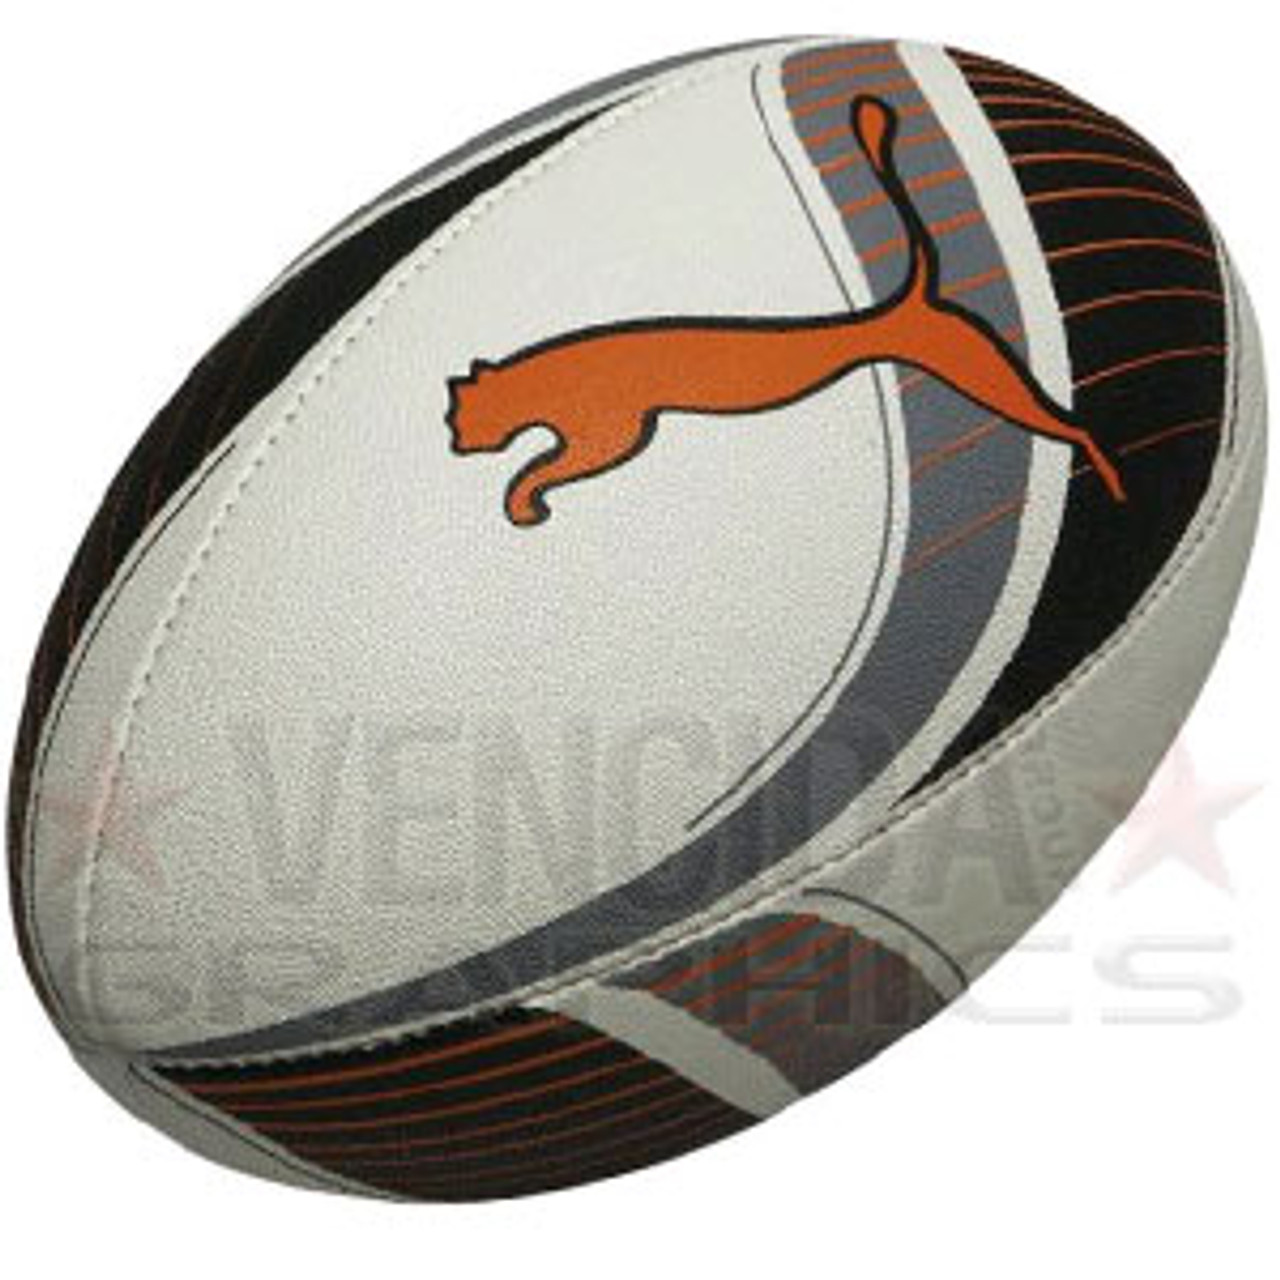 PUMA touch rugby ball